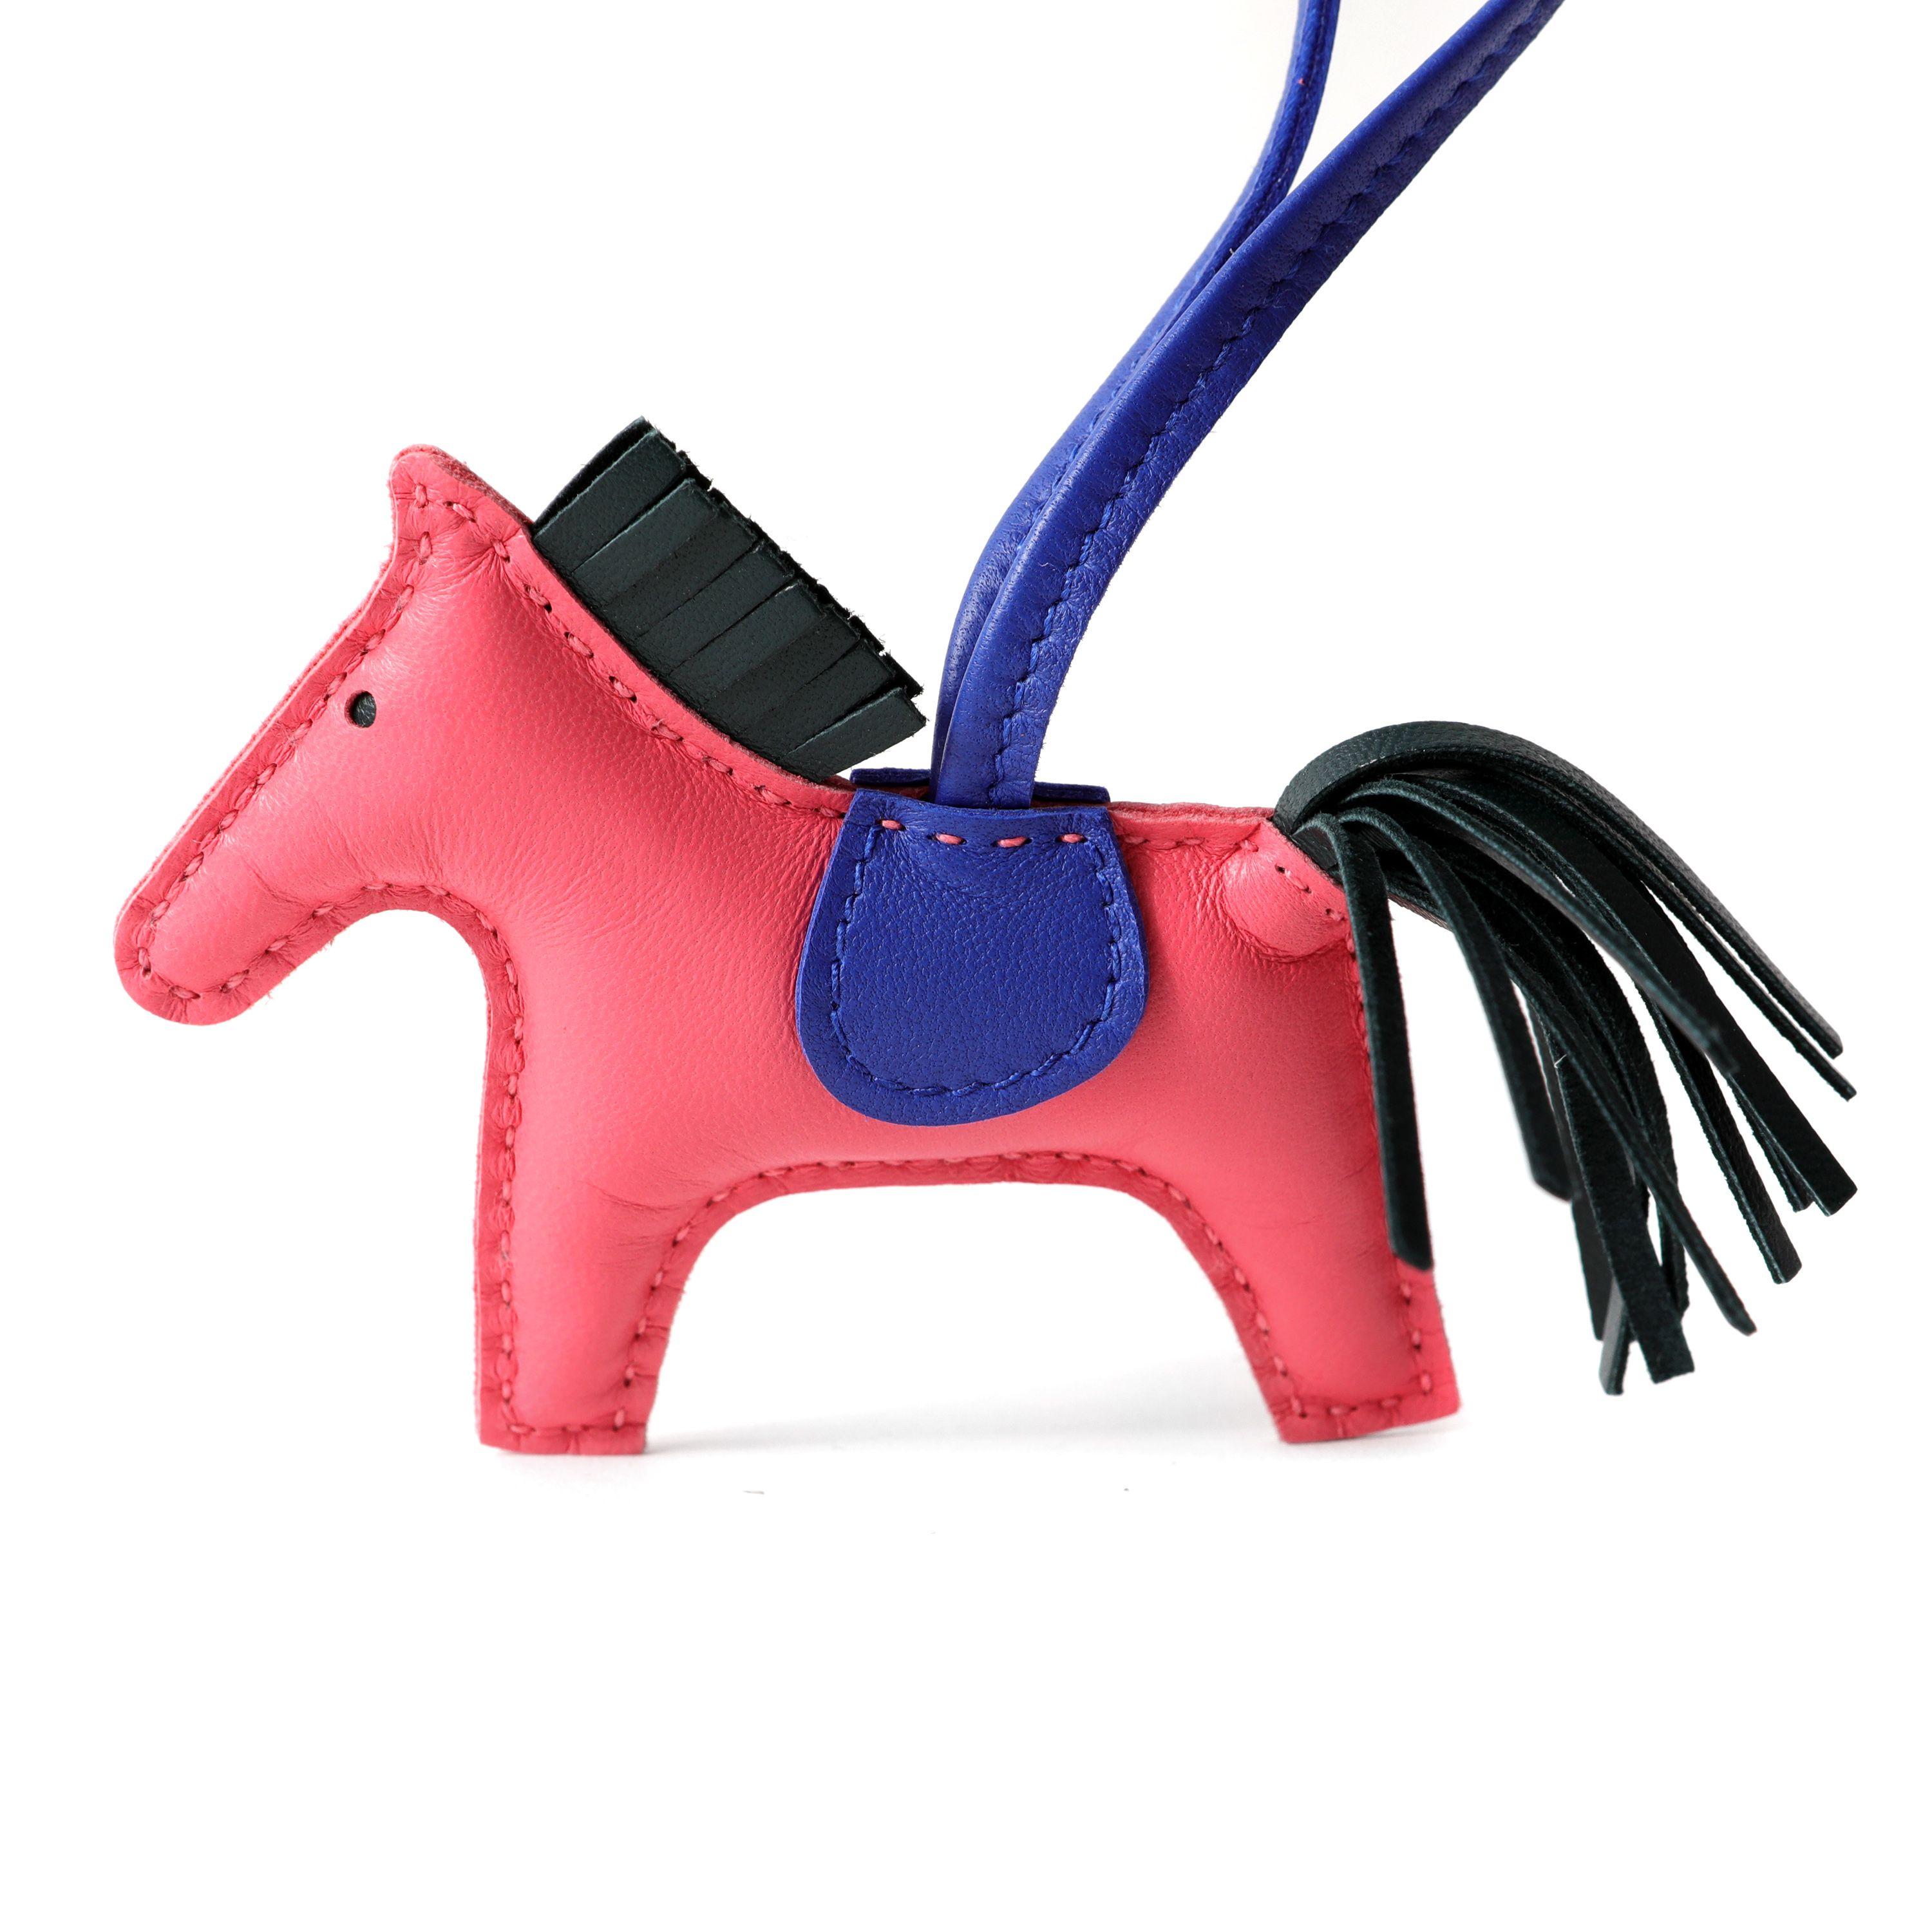 This authentic Hermès Pink and Blue Leather Rodeo Charm is pristine.  Box included.

PBF 13978
